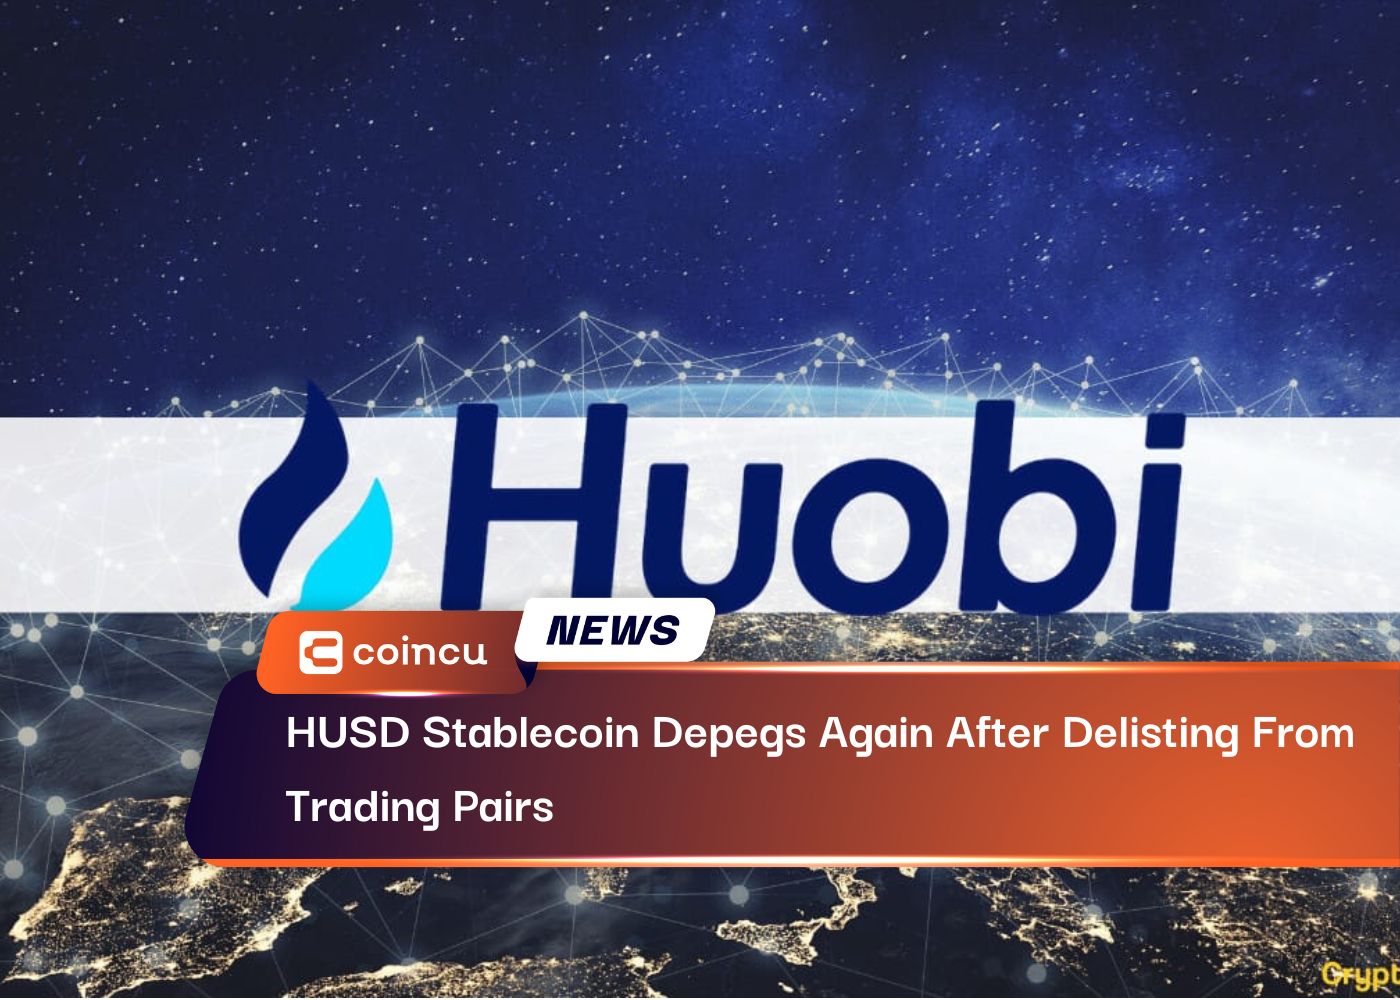 HUSD Stablecoin Depegs Again After Delisting From Trading Pairs